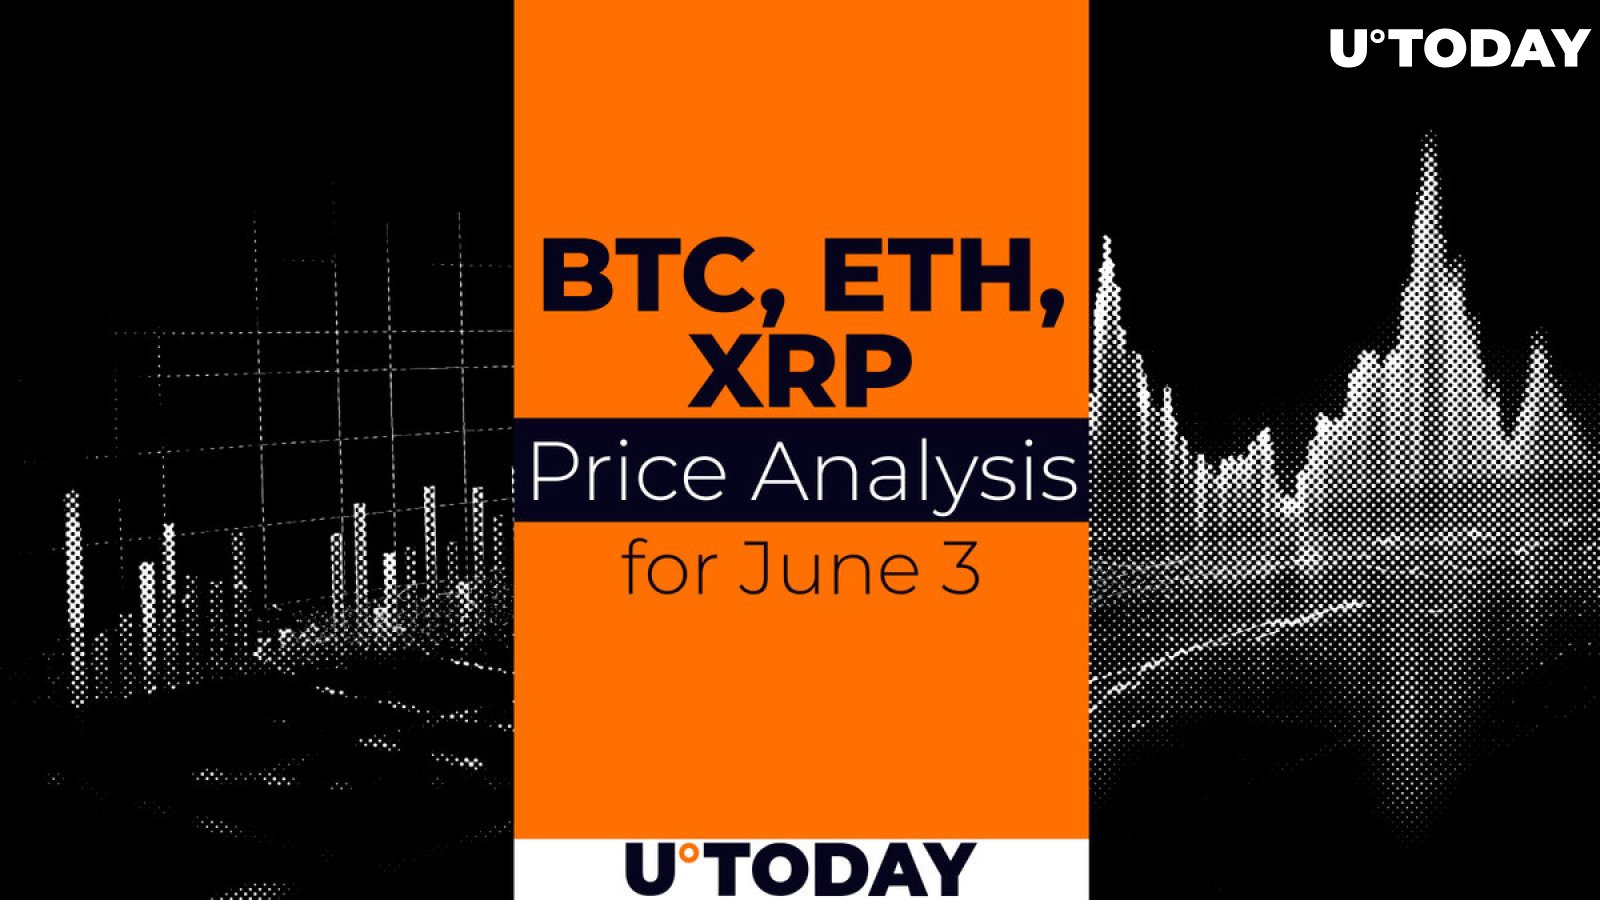 BTC, ETH and XRP Price Prediction for June 3